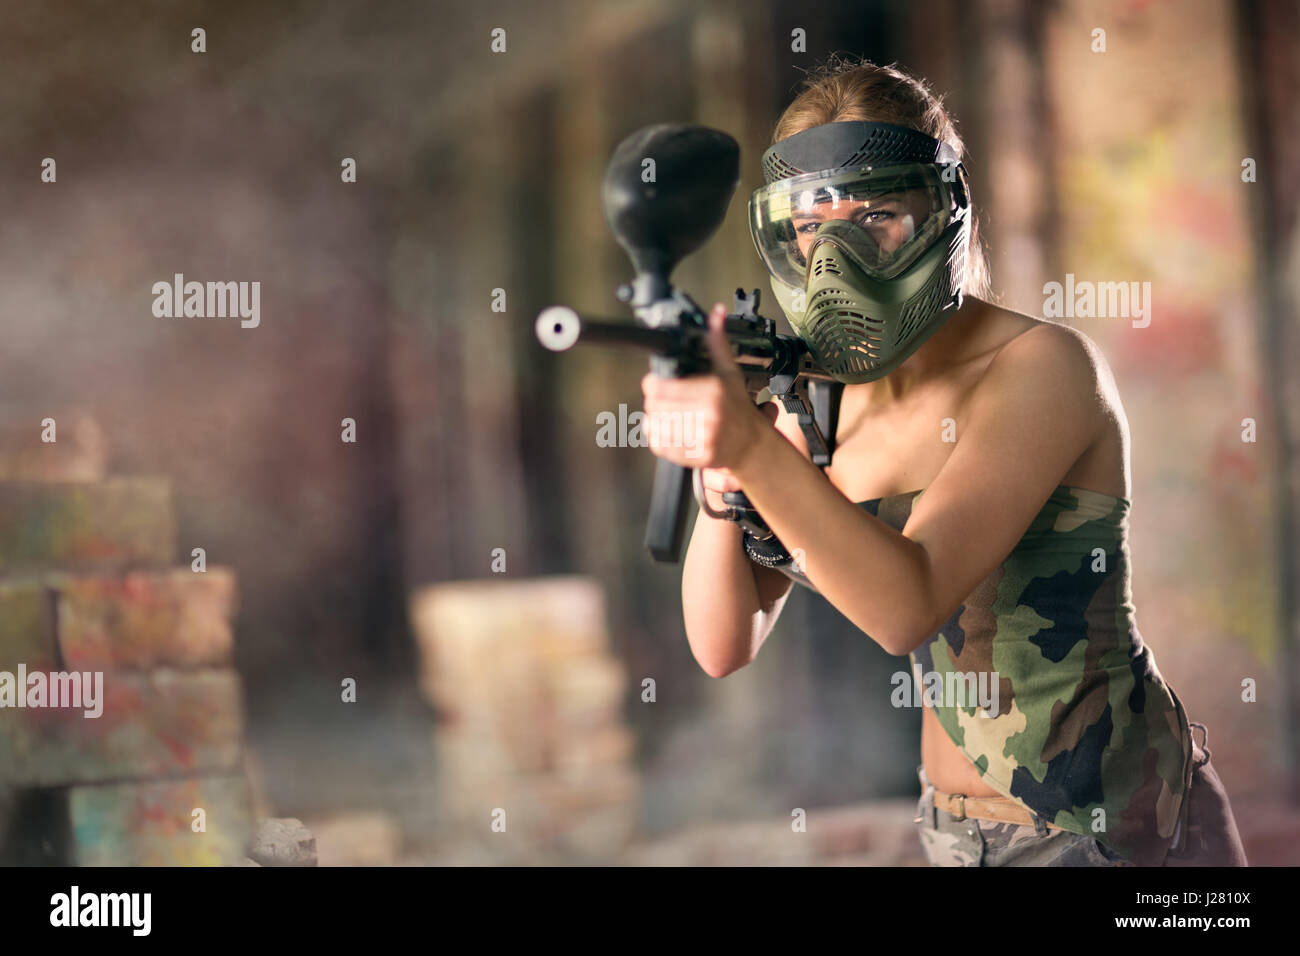 Paintball, female player with marker gun Stock Photo